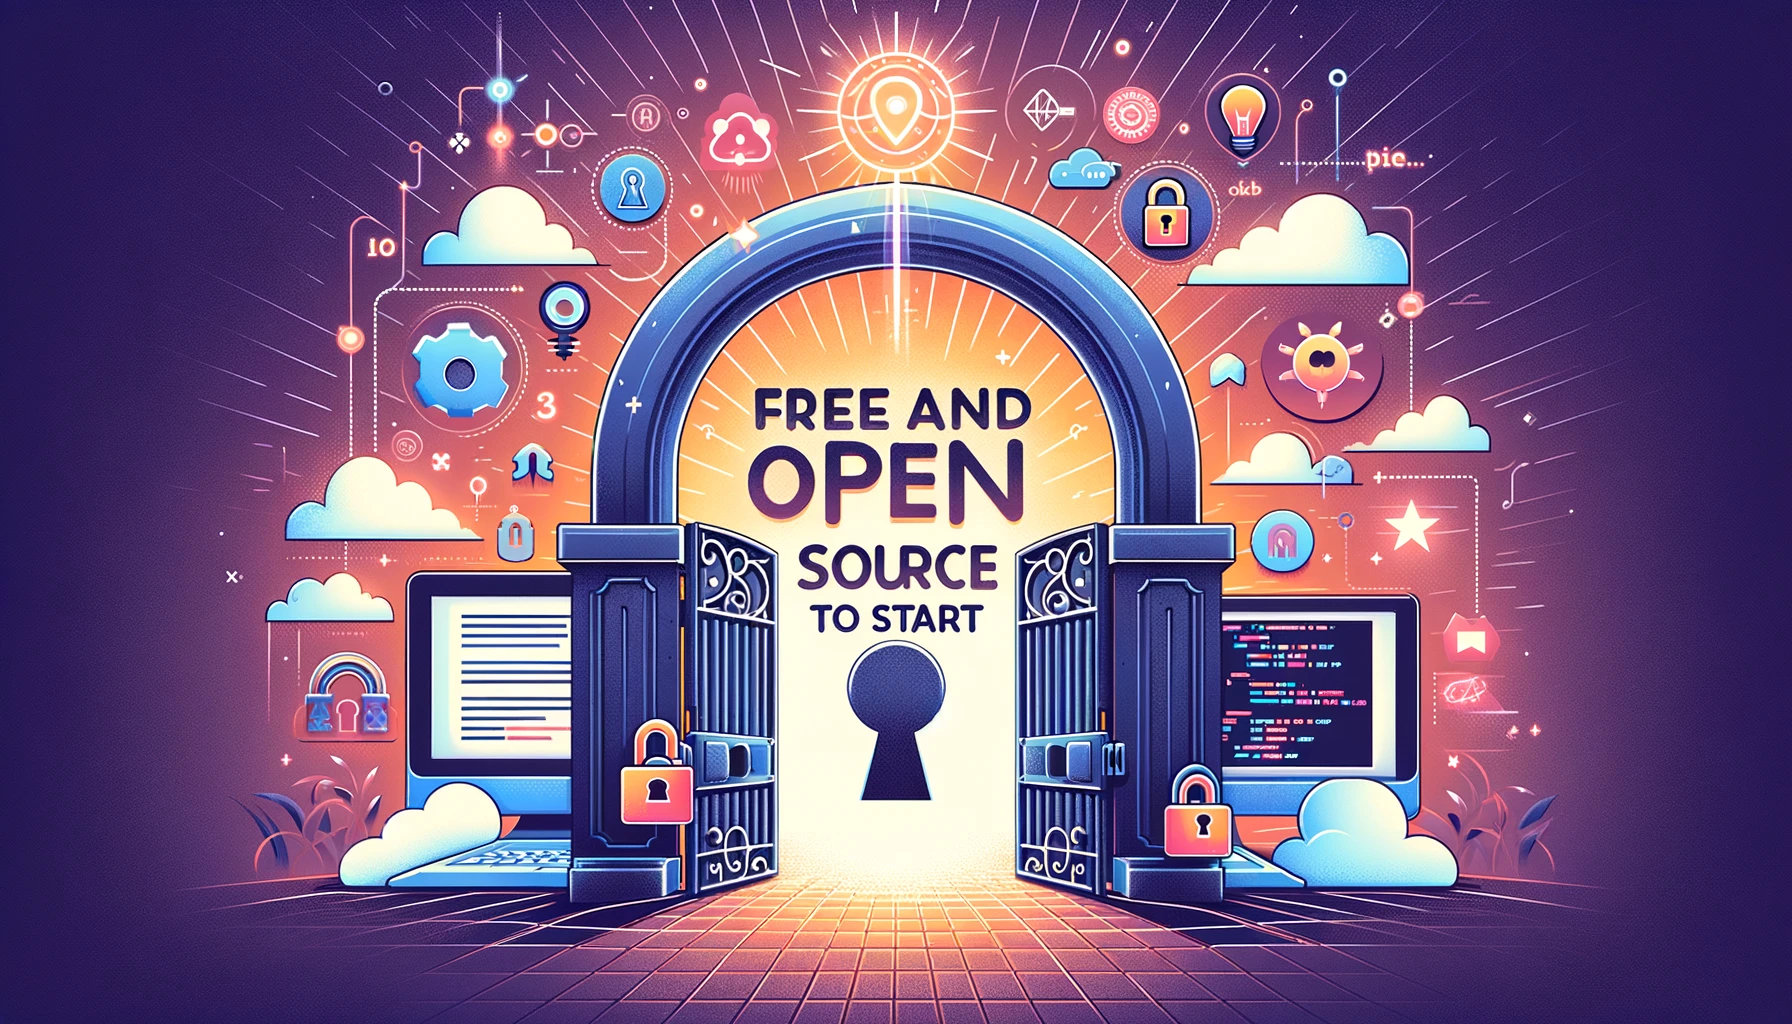 Image depicting the concept of free and open source software with symbols of an unlocked padlock, open source code on a screen, and a gateway representing open access and zero cost, highlighting the opportunities in software development.